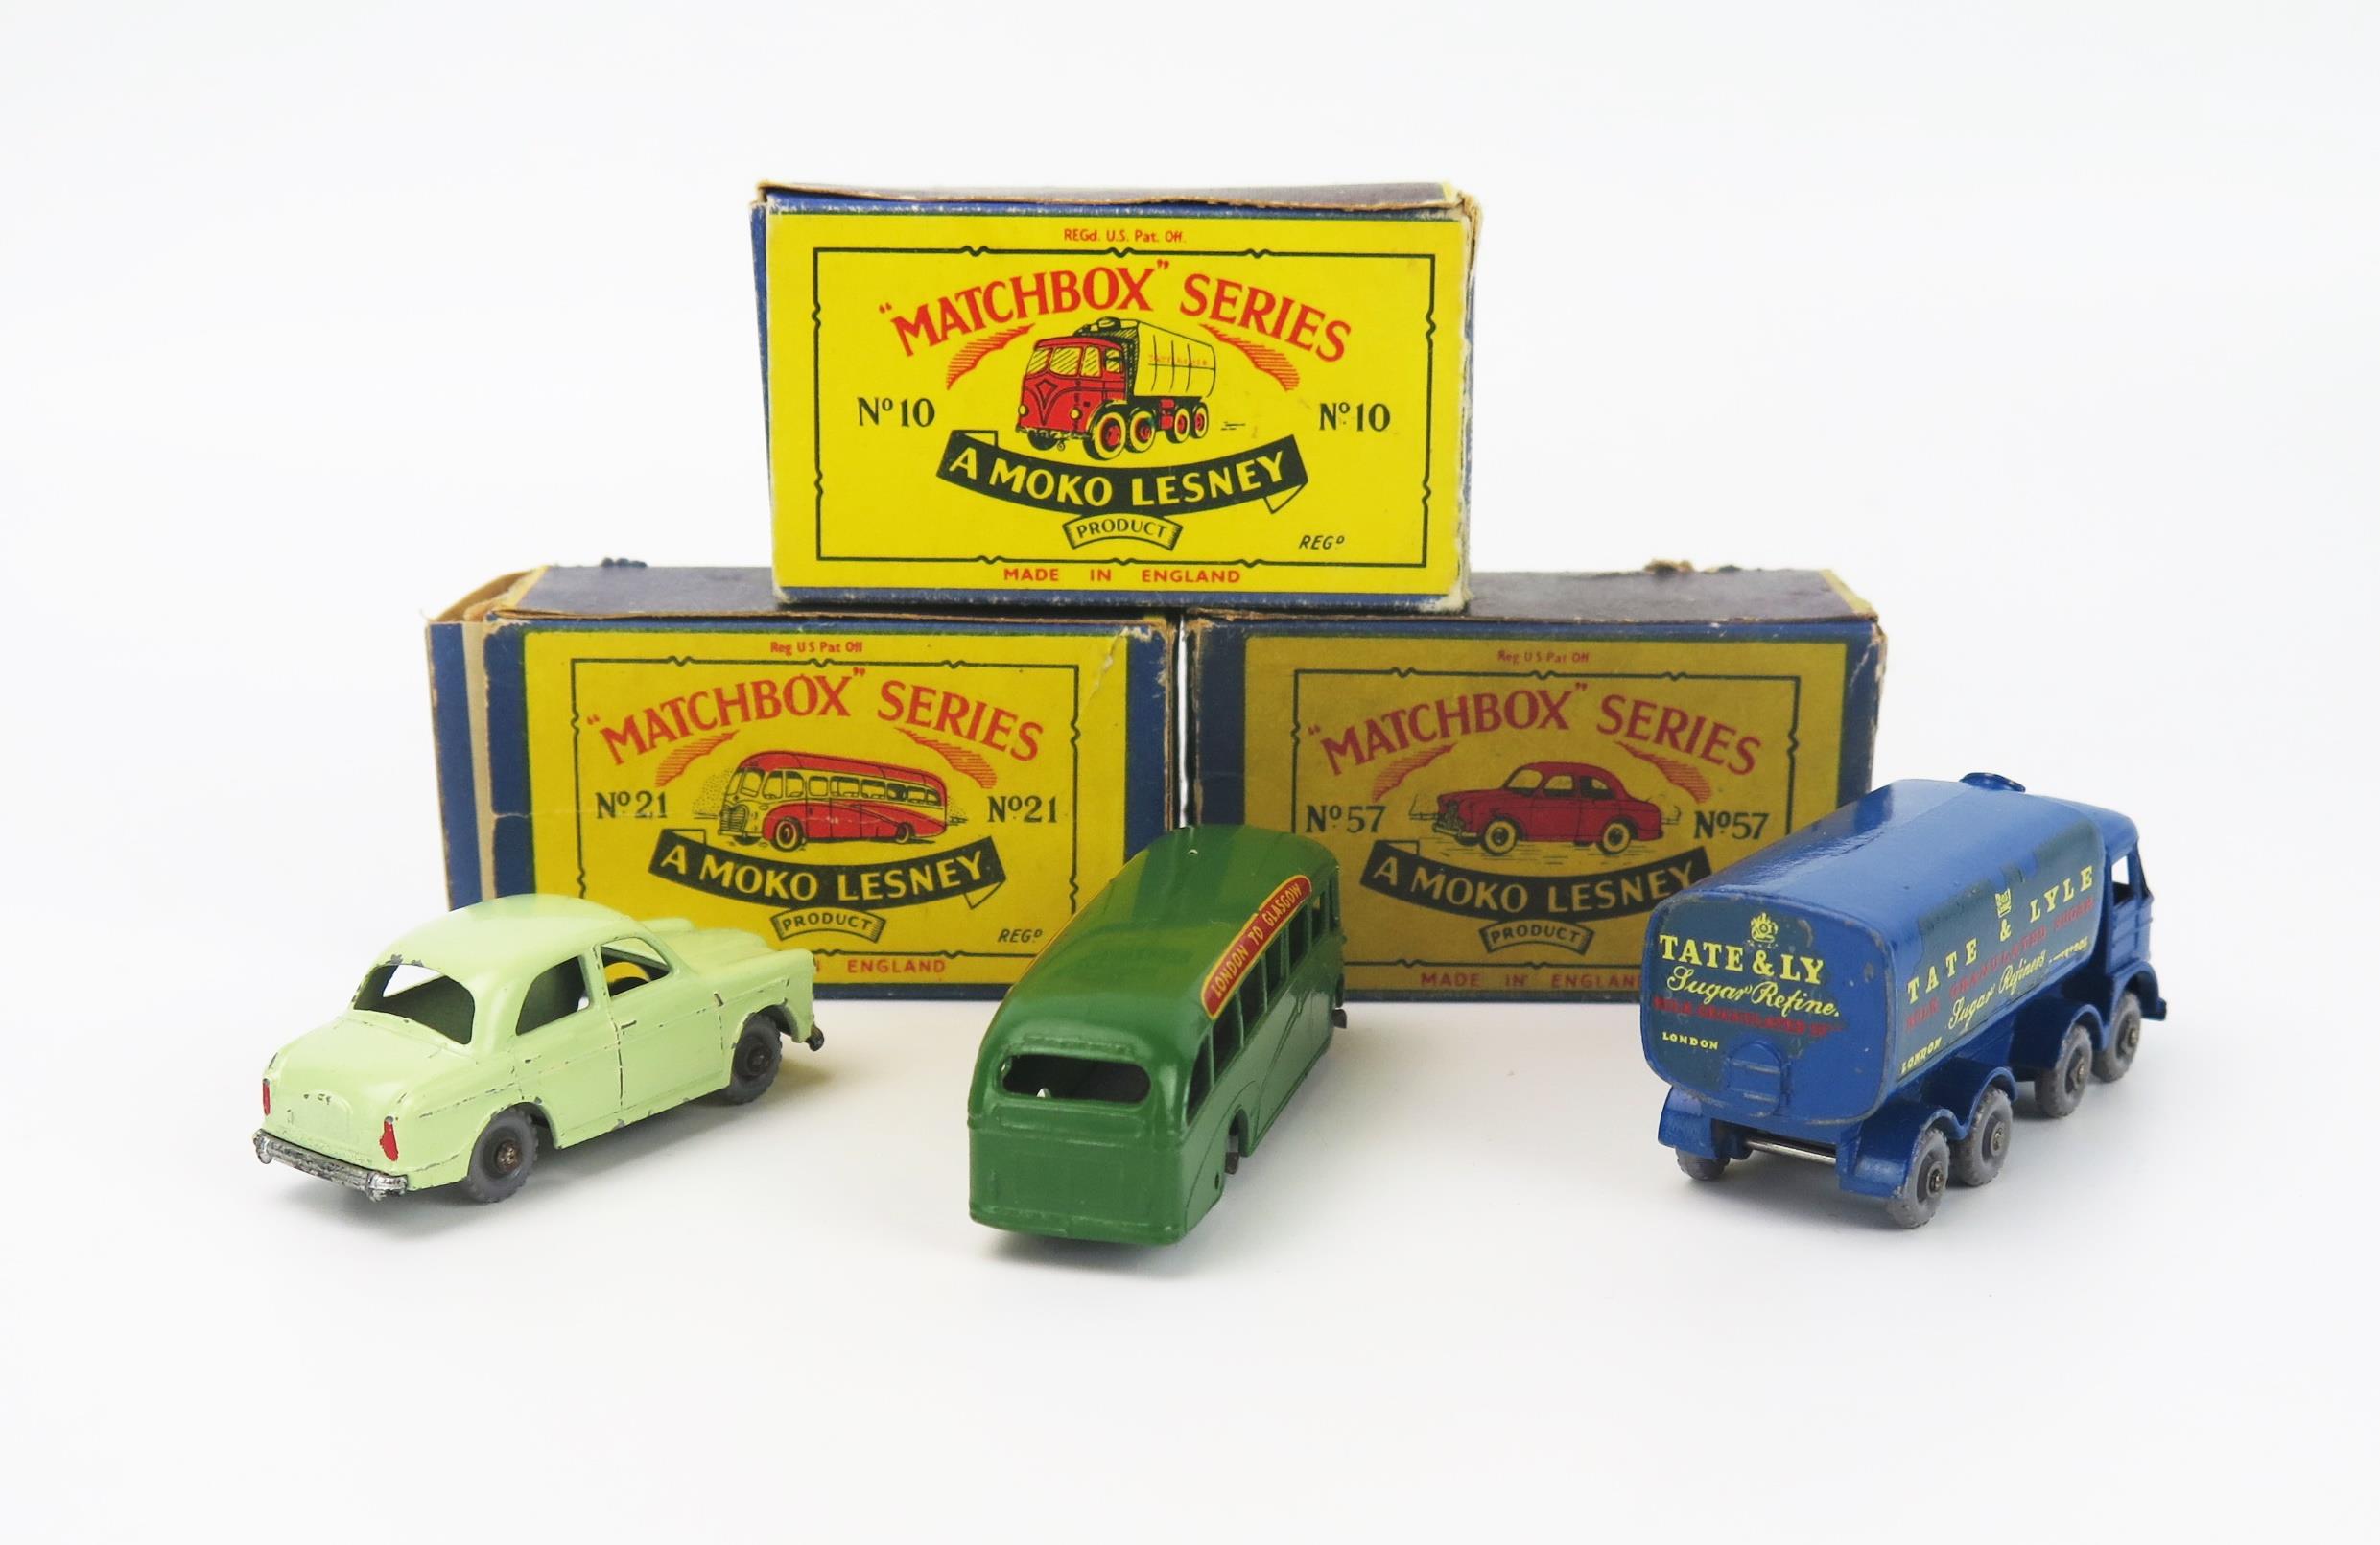 Matchbox Regular Wheels trio - all with grey plastic wheels (1) 10a Foden Sugar Container with crown - Image 2 of 2